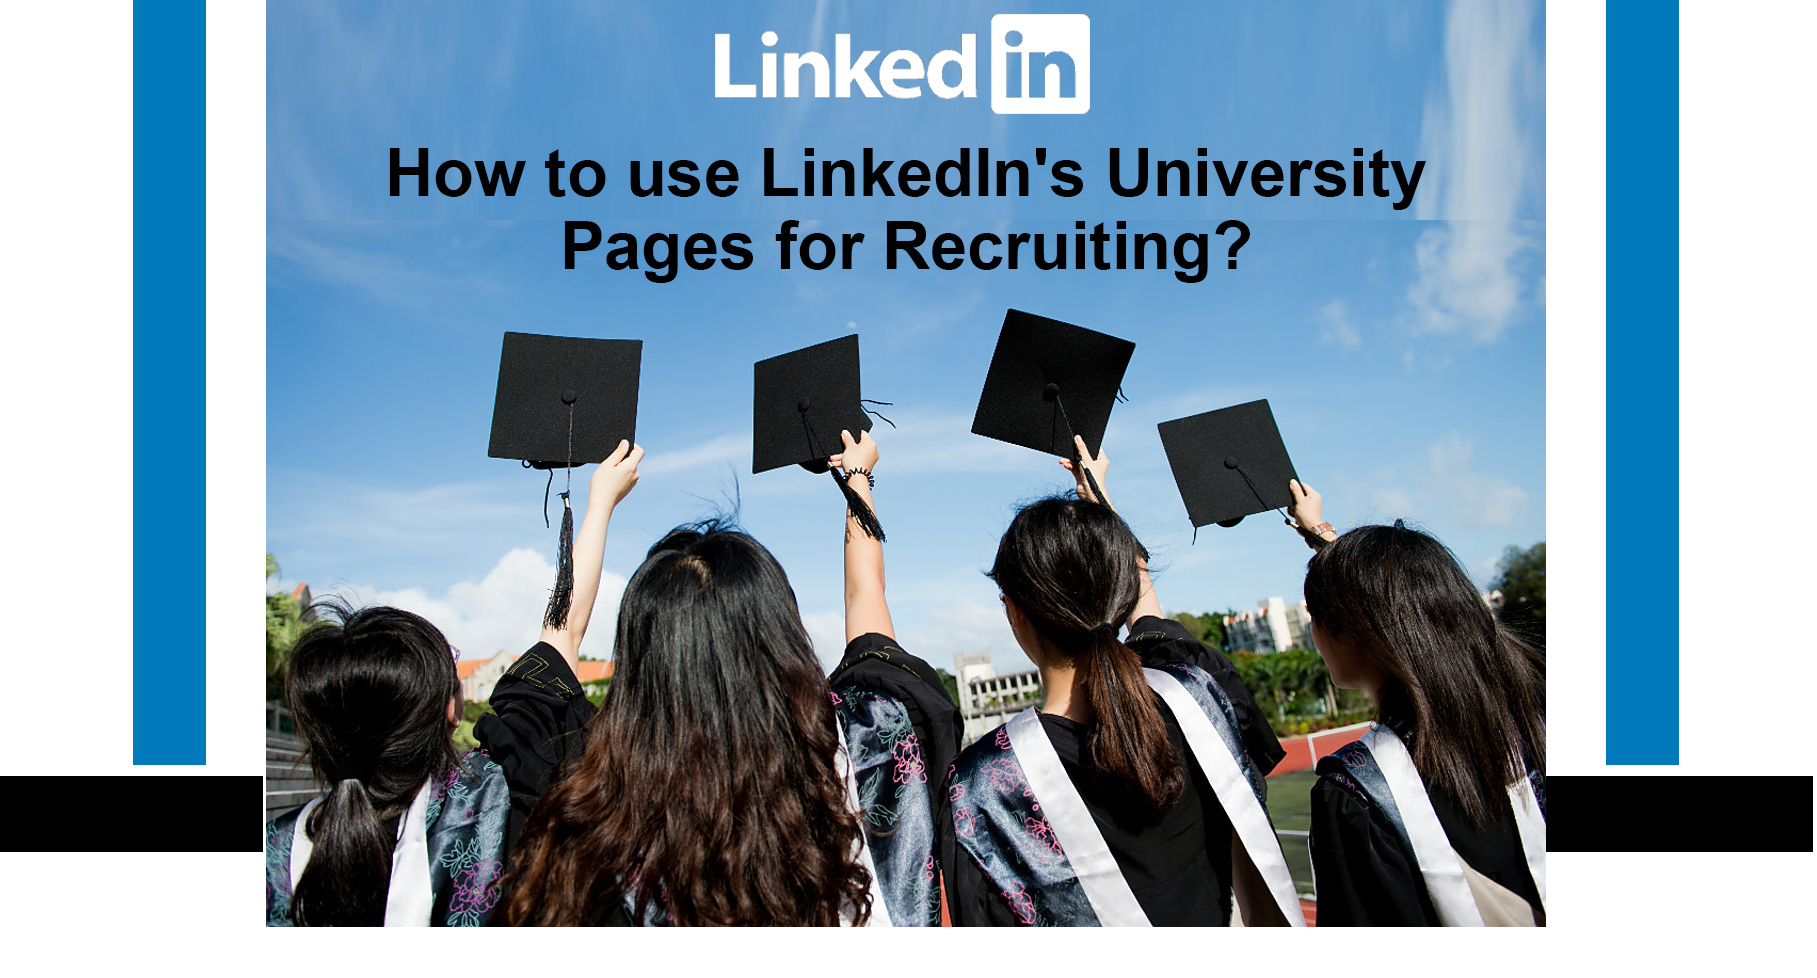 How to use LinkedIn's University Pages for Recruiting?